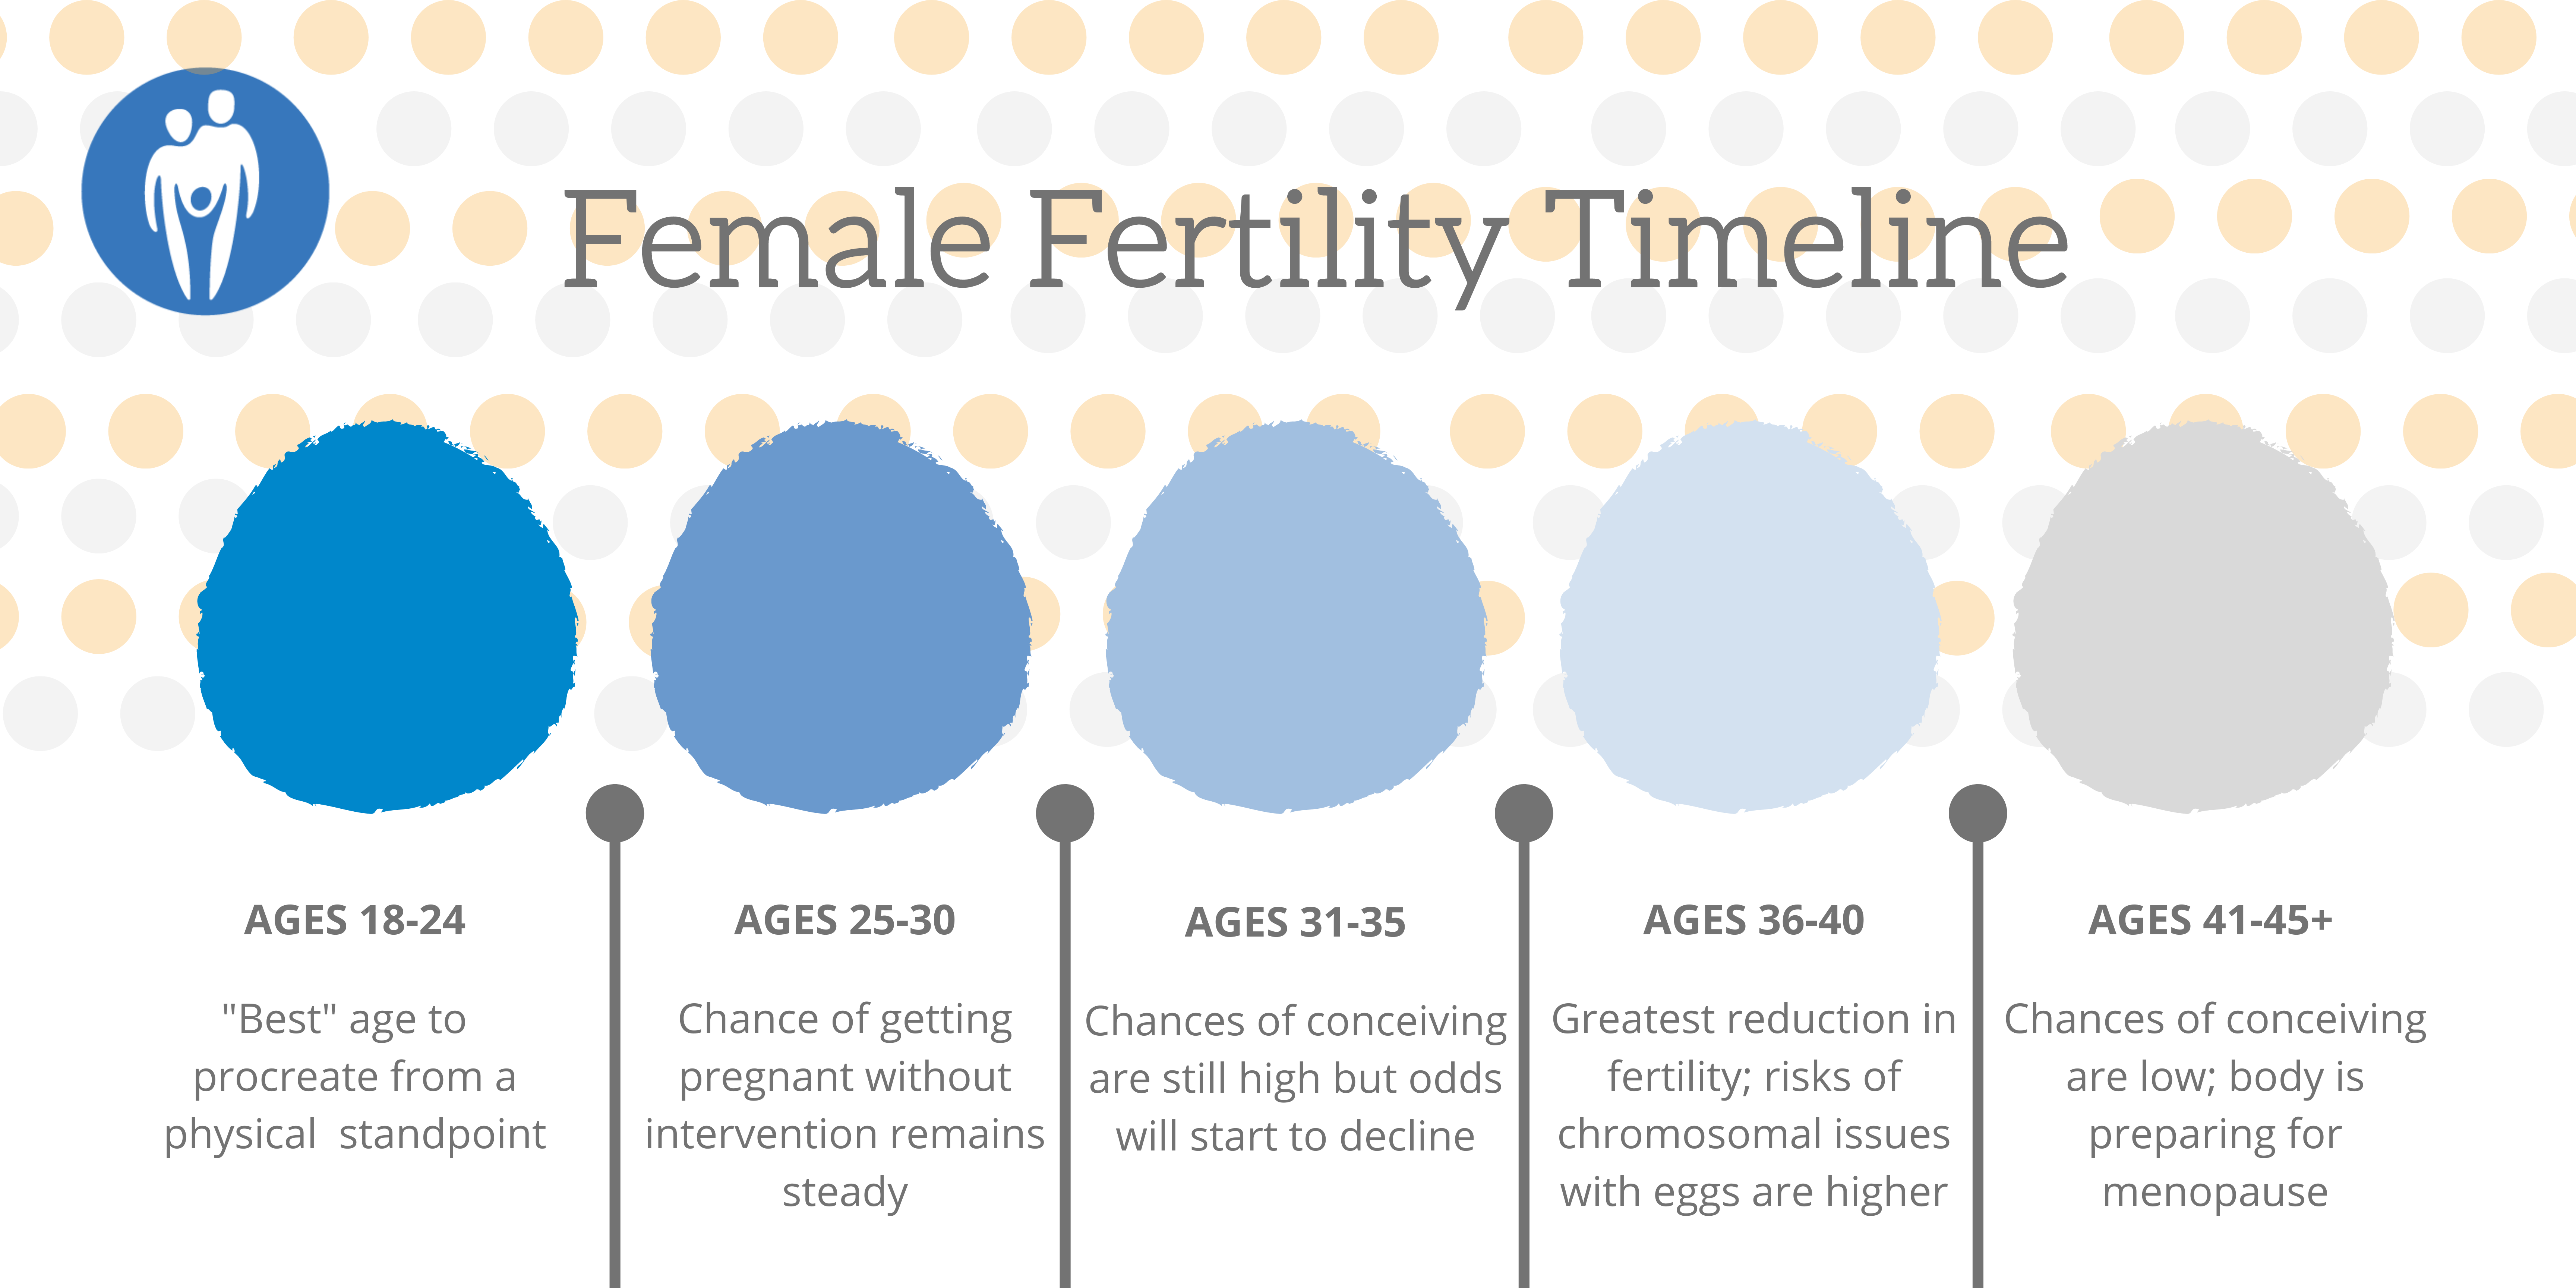 Can my Age affect my Fertility?